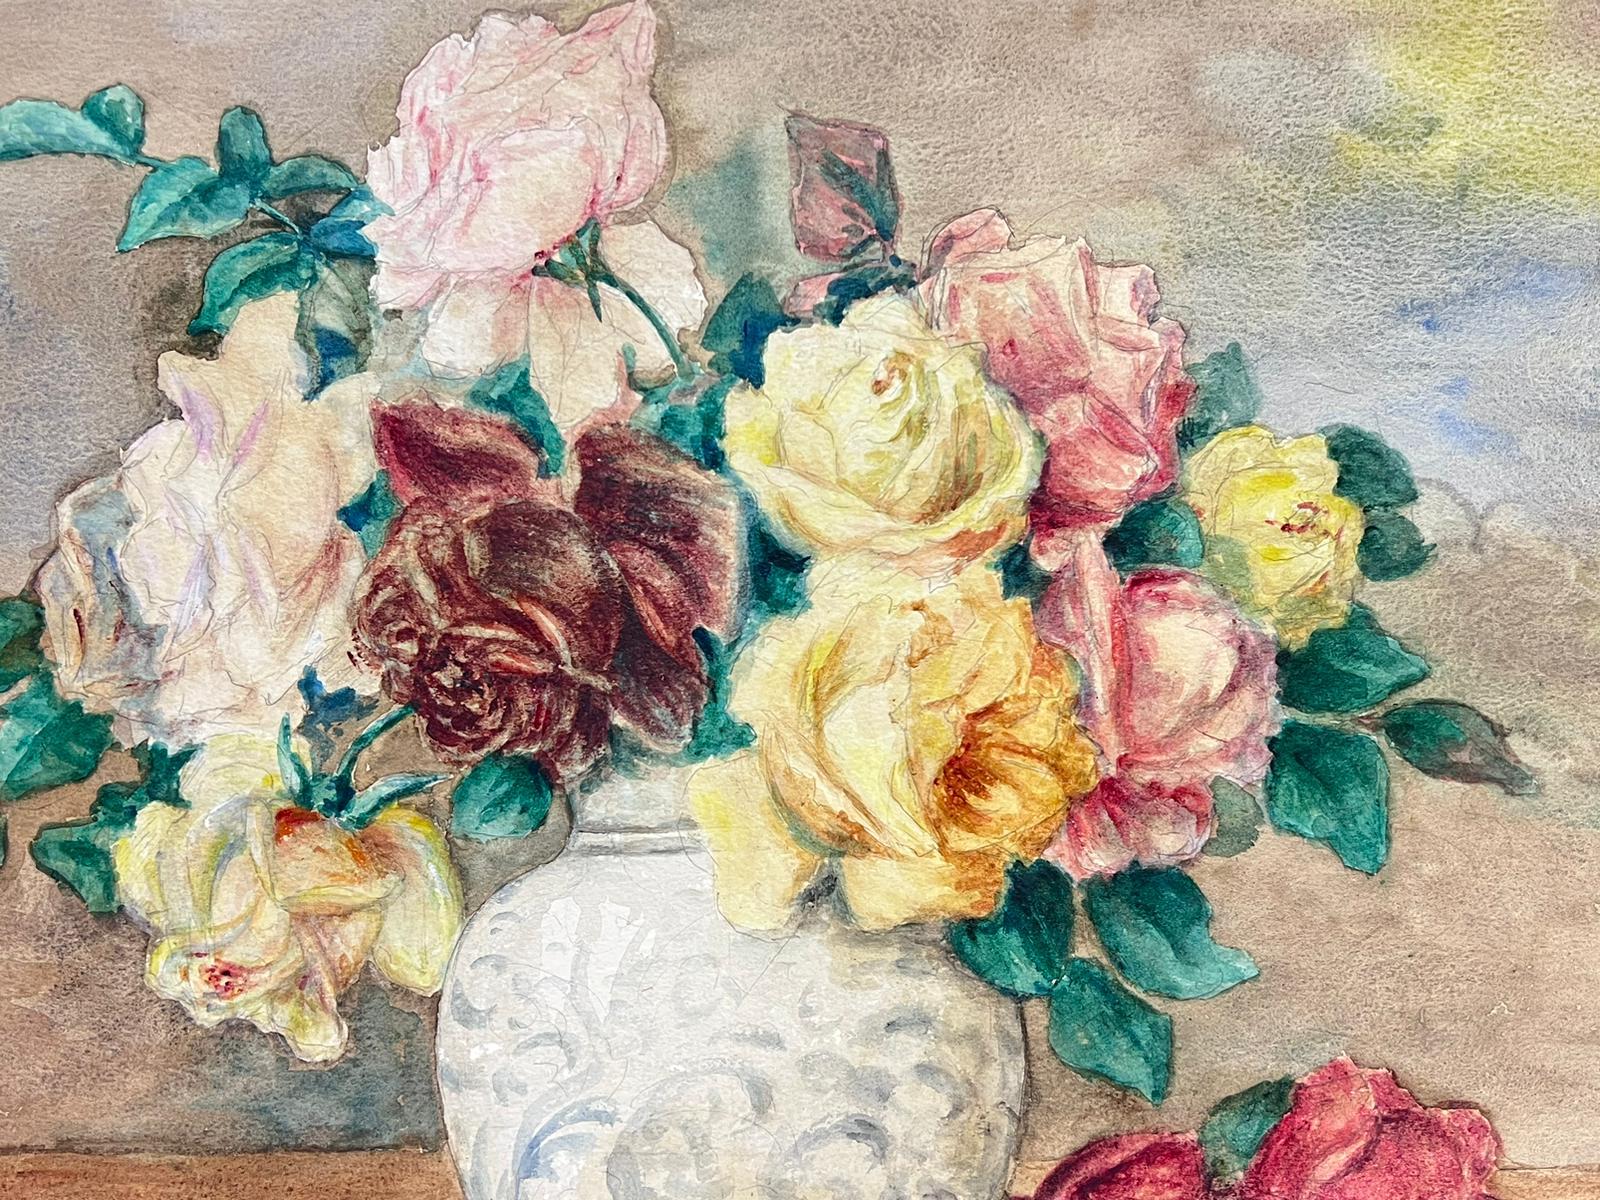 Still Life of Roses
French artist, late 19th century
signed watercolour painting on thin board, unframed
painting: 17 x 22 inches
provenance: private collection, France
condition: very good and sound condition